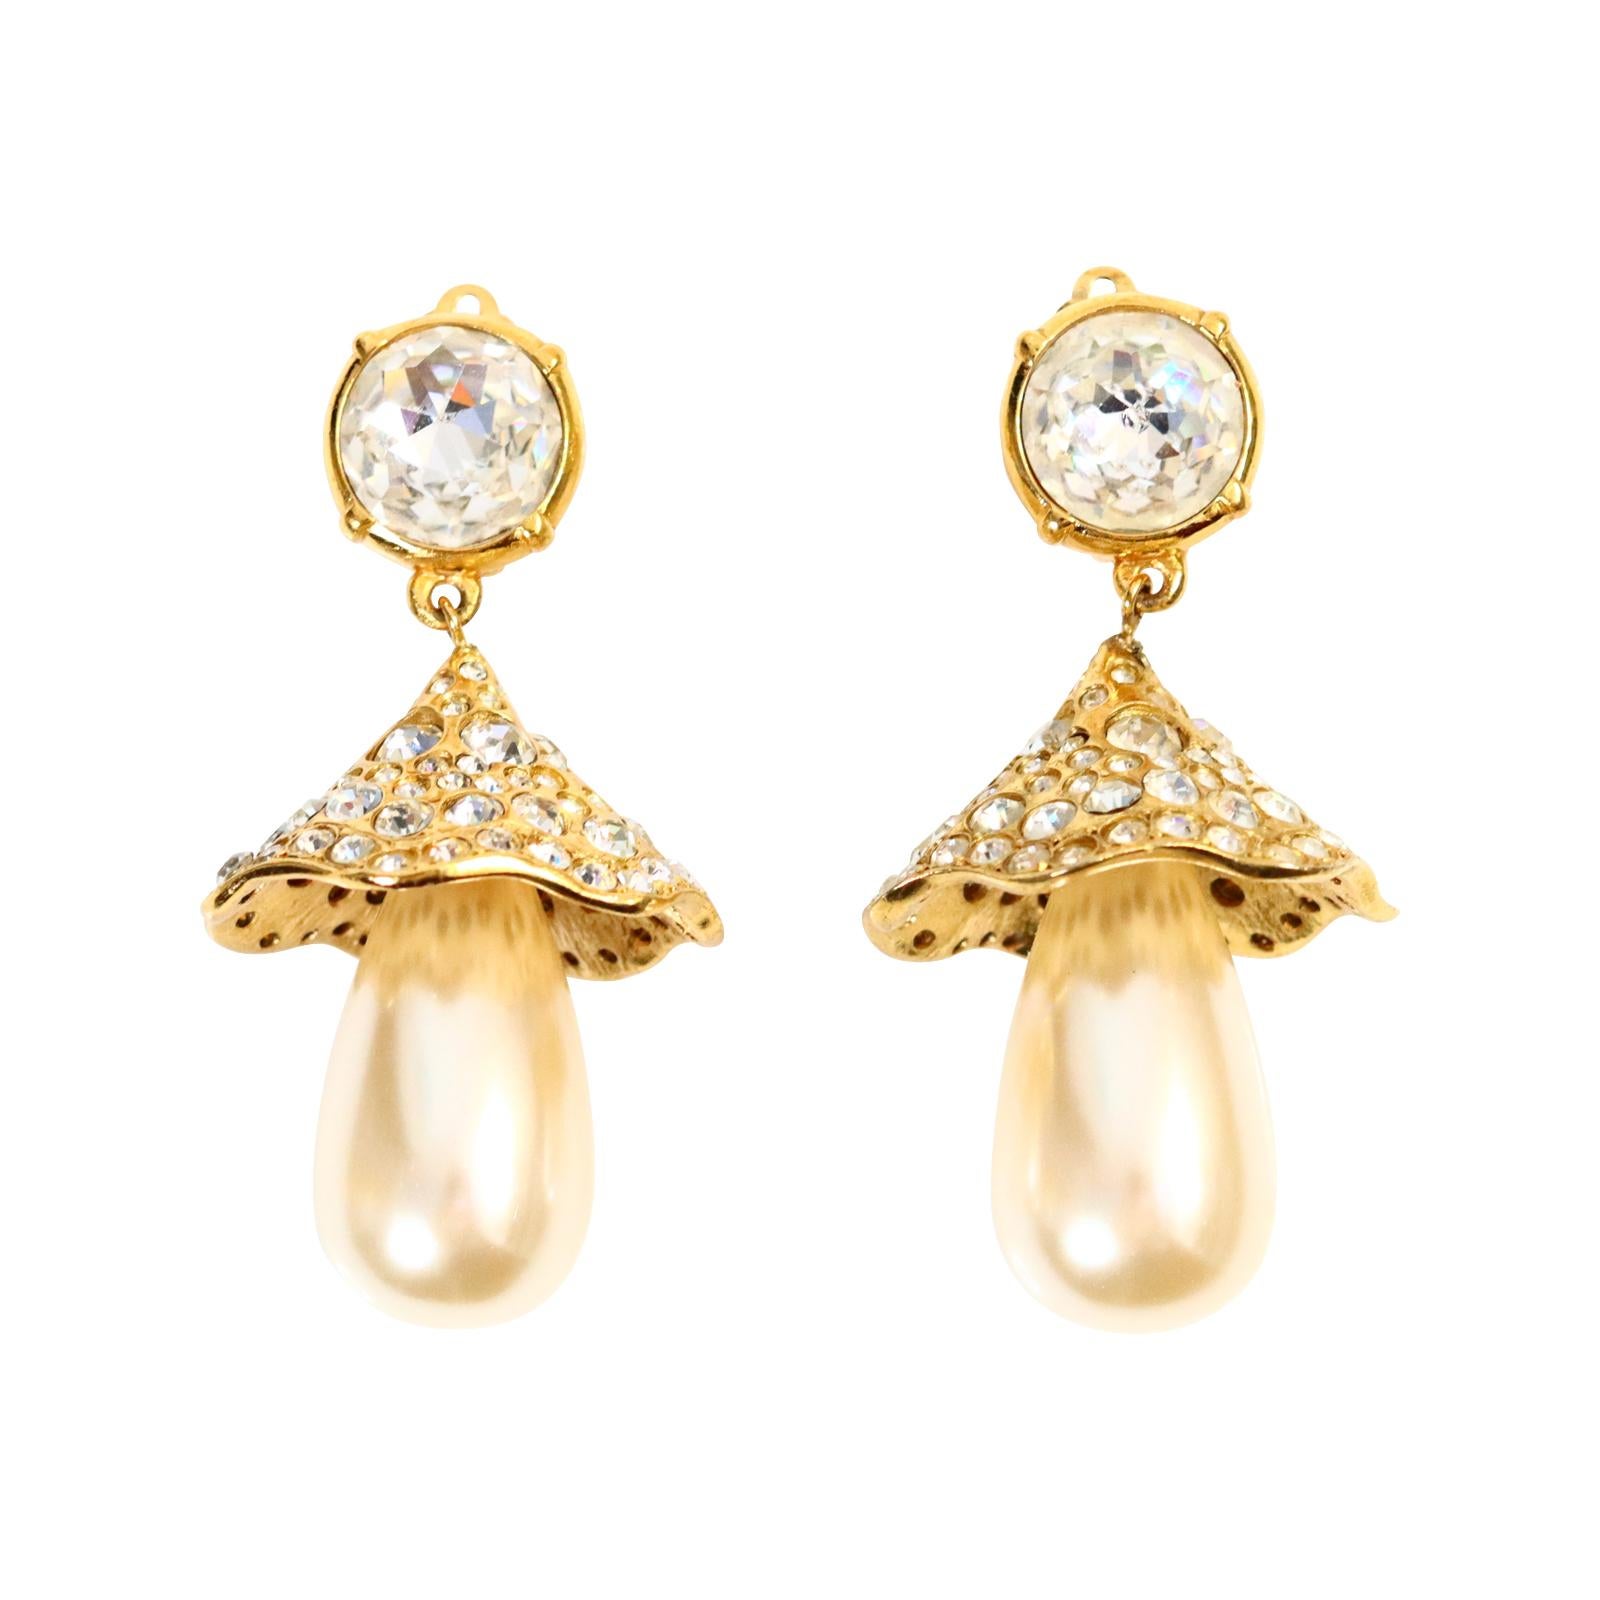 Vintage Yves Saint Laurent YSL Diamante Dome Like Pearl Earrings Circa 1980s. These are so gorgeous where do I even begin. The faux pearl is like a flower waking up under a dome of gold and crystals.  Like a  small umbrella that has sheltered it